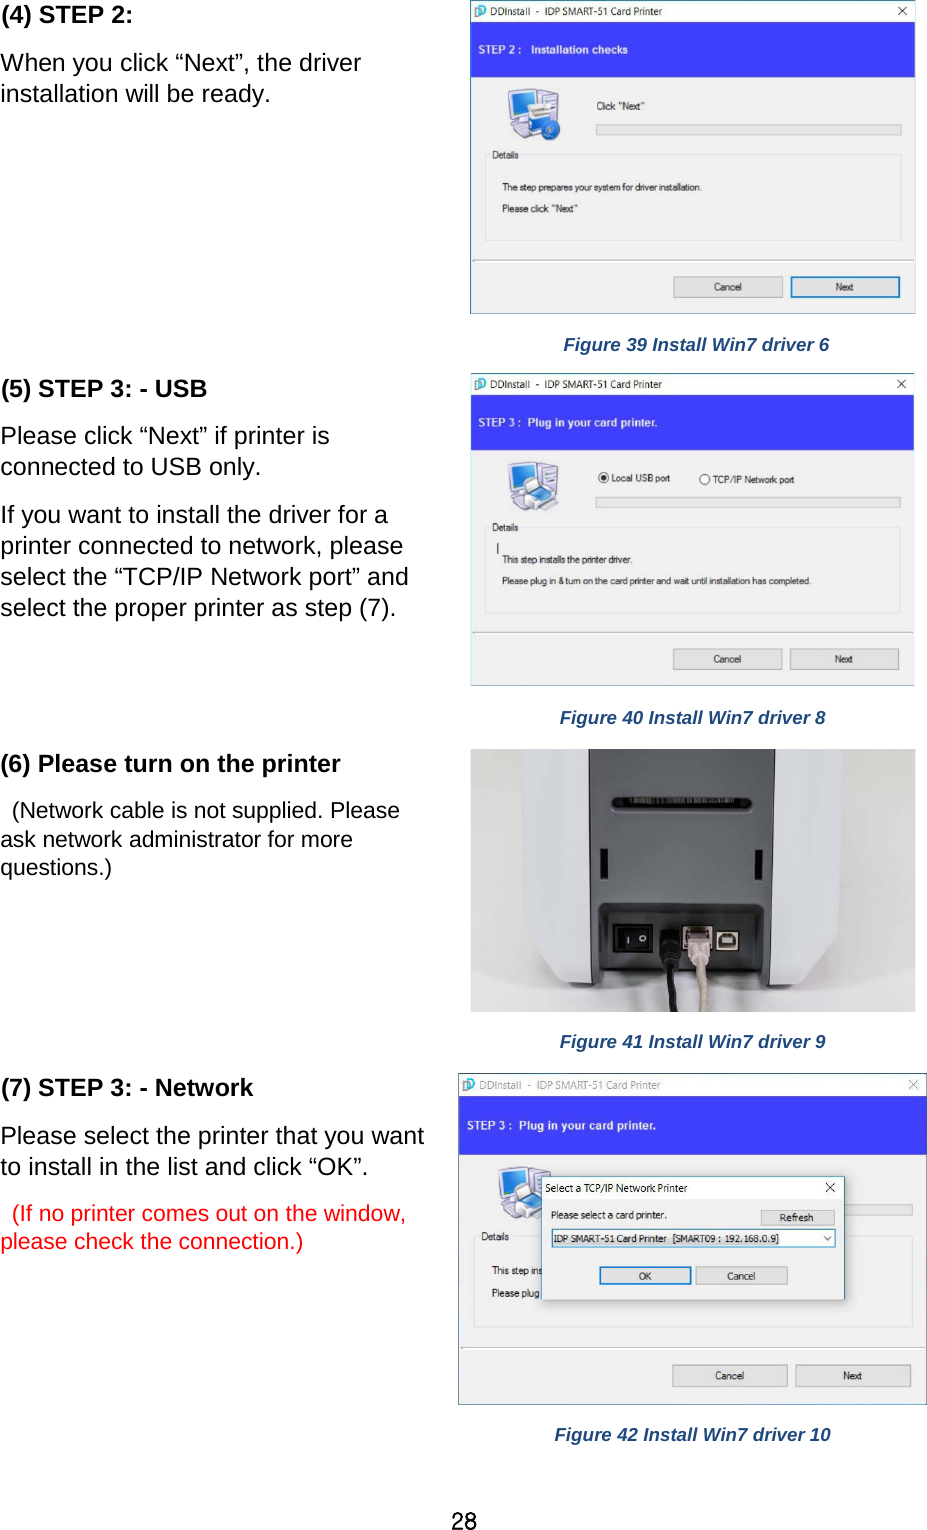 28 (4) STEP 2:   When you click “Next”, the driver installation will be ready.     Figure 39 Install Win7 driver 6 (5) STEP 3: - USB Please click “Next” if printer is connected to USB only.   If you want to install the driver for a printer connected to network, please select the “TCP/IP Network port” and select the proper printer as step (7).   Figure 40 Install Win7 driver 8 (6) Please turn on the printer  (Network cable is not supplied. Please ask network administrator for more questions.)     Figure 41 Install Win7 driver 9 (7) STEP 3: - Network Please select the printer that you want to install in the list and click “OK”.    (If no printer comes out on the window, please check the connection.)     Figure 42 Install Win7 driver 10 